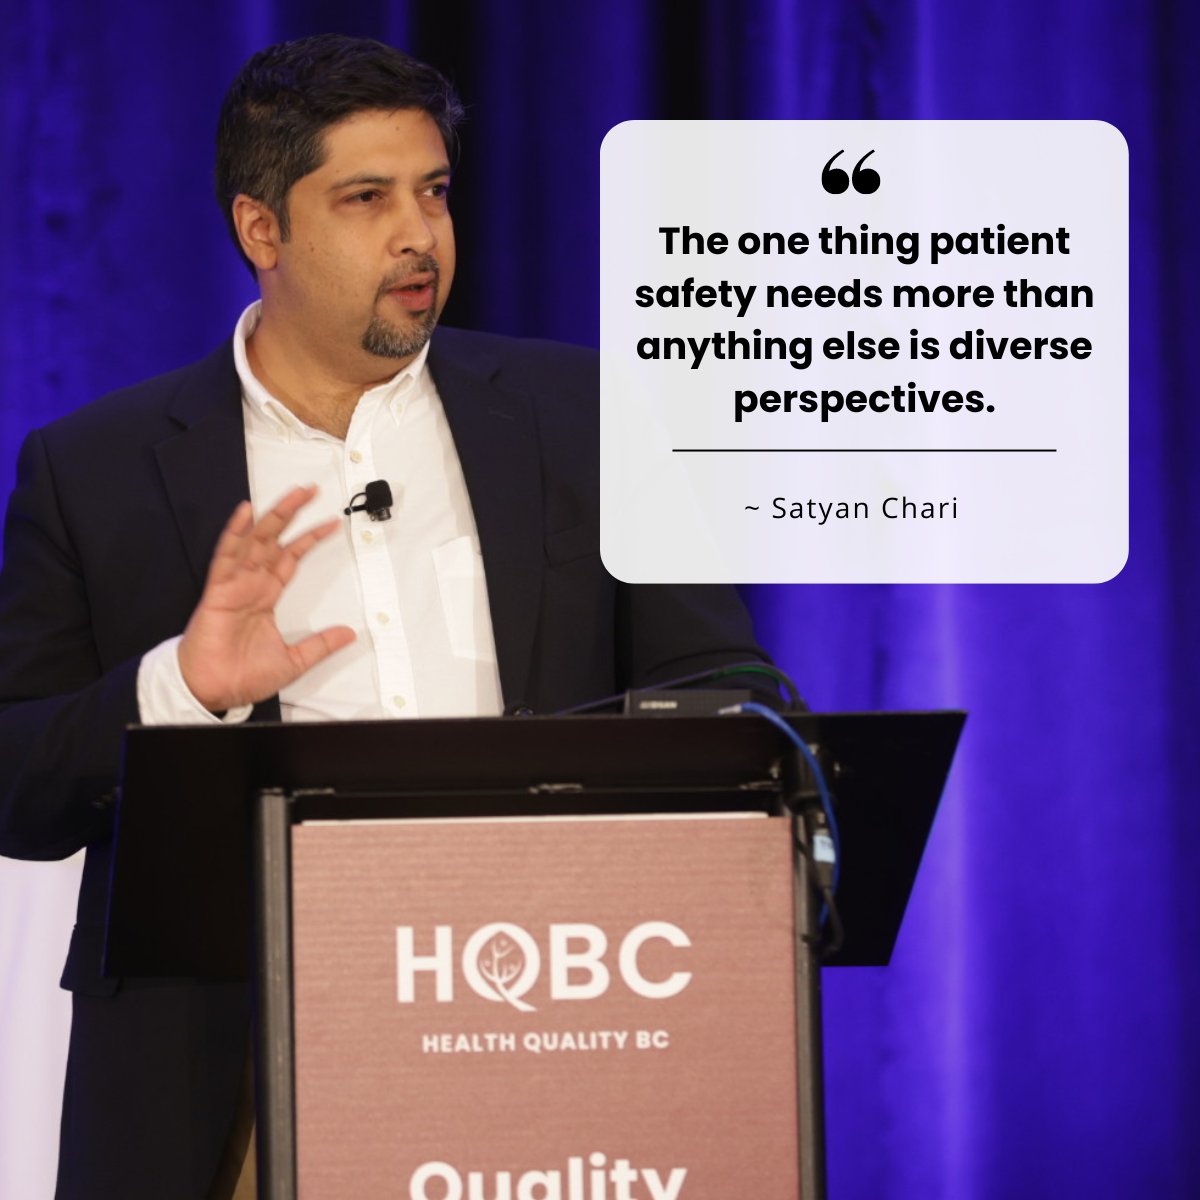 This morning Satyan Chari delivered a plenary presentation on enhancing patient safety. Tune in this afternoon at 1445 to watch the final livestream session of Quality Forum 2024. ow.ly/678Z50Roph4 #QF24